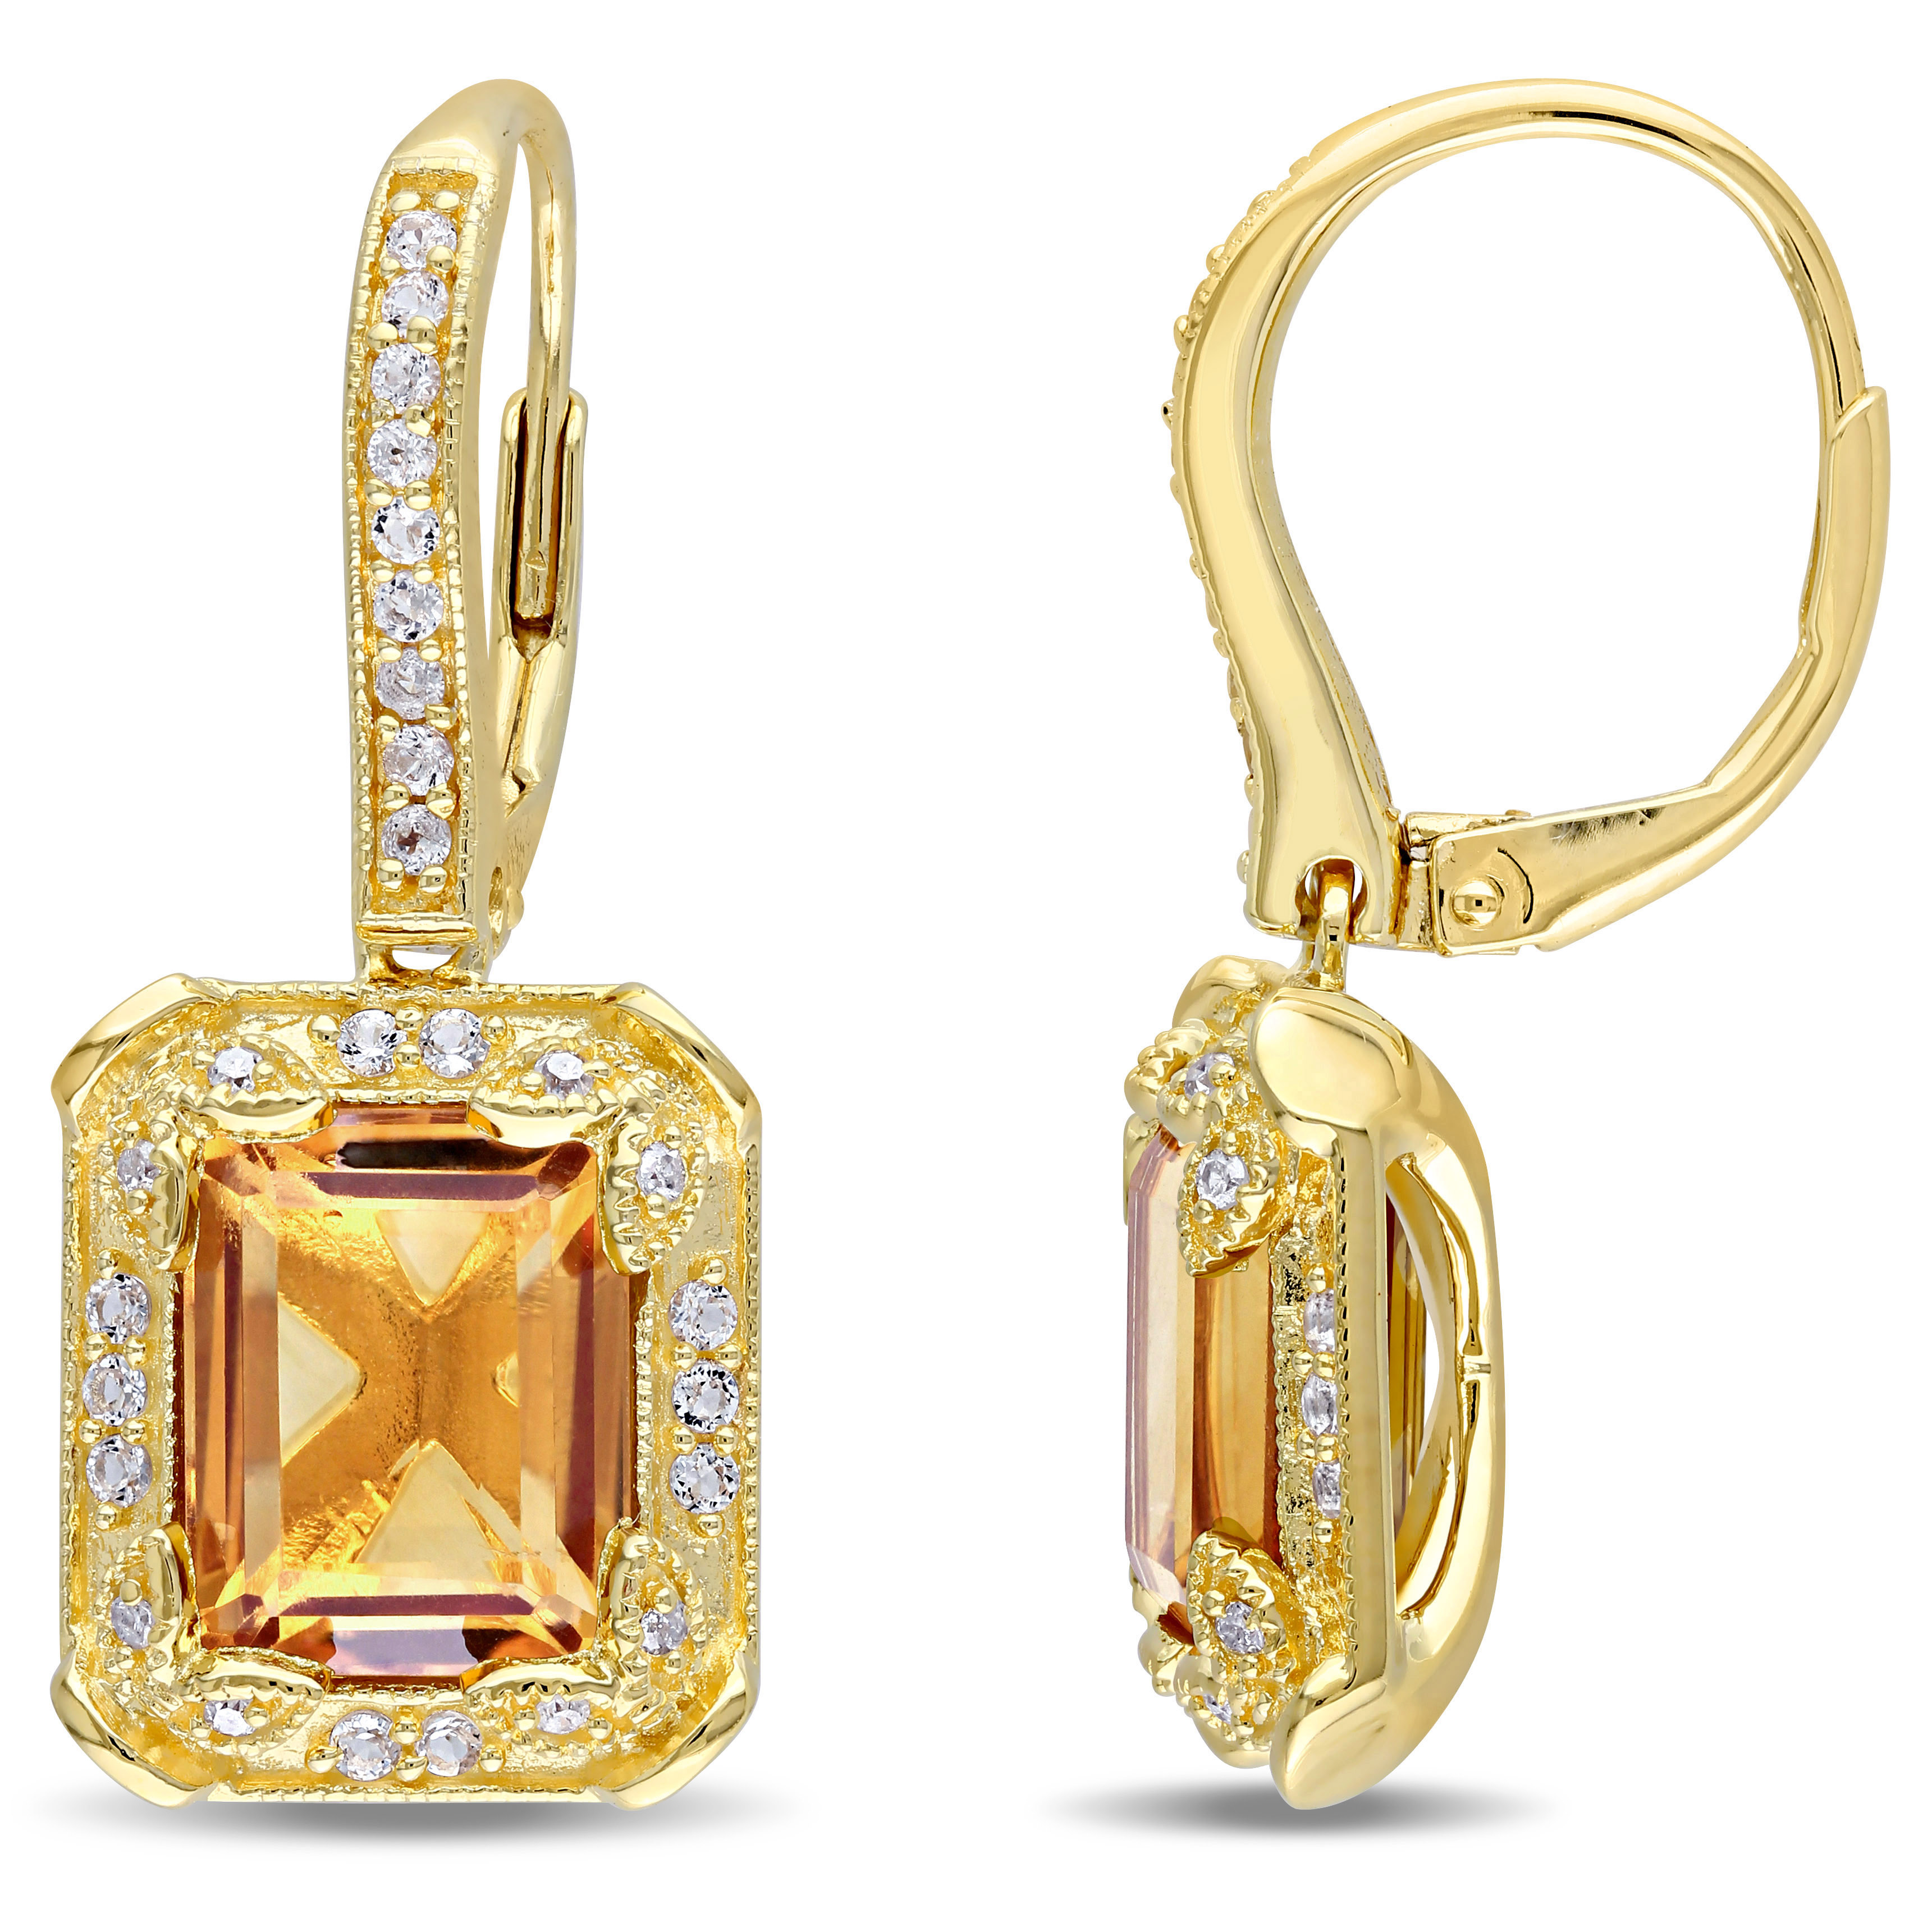 6 3/5 CT TGW Citrine, White Topaz and 1/10 CT TW Diamond Leverback Earrings in Yellow Plated Sterling Silver